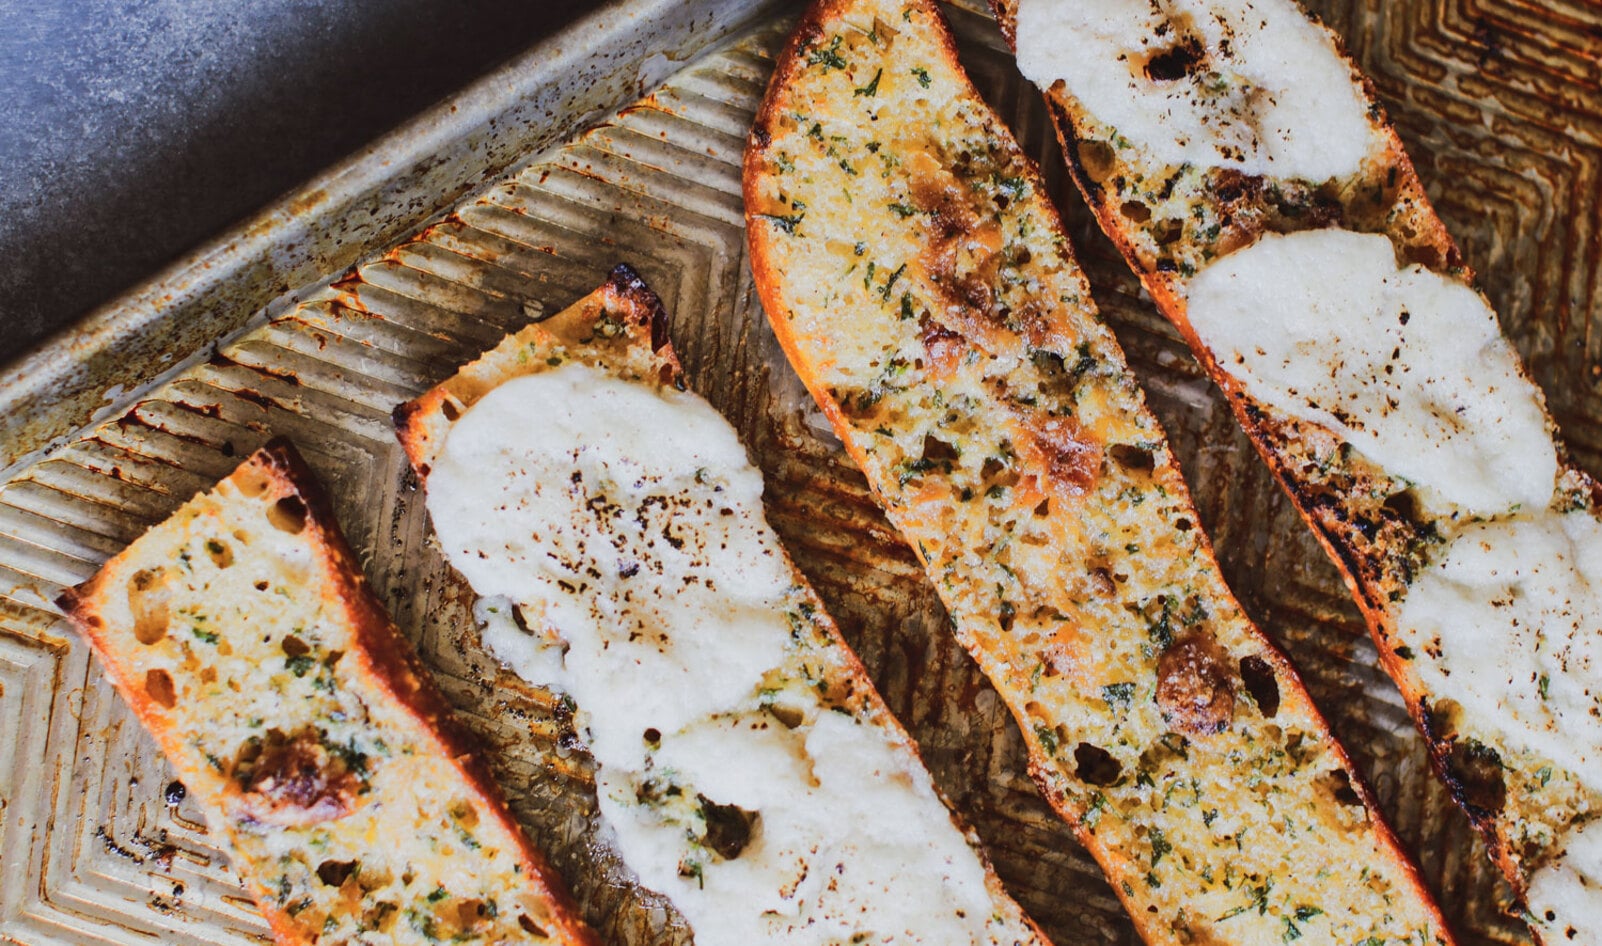 Garlic Lovers, These 20 Delicious Vegan Recipes Are For You